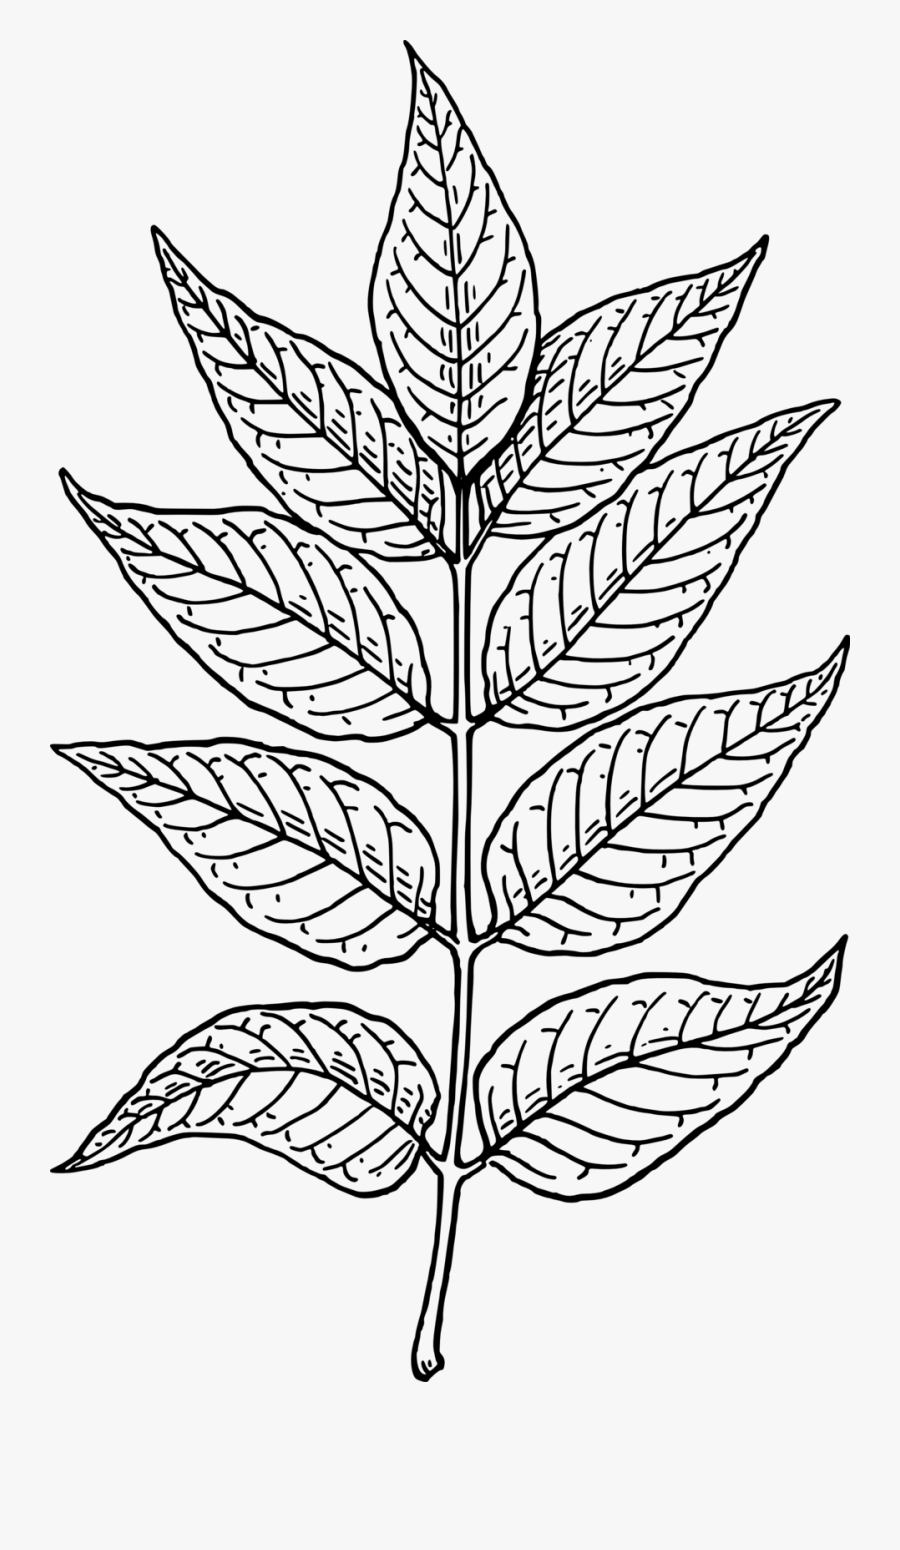 Ash Leaves Small Clipart 300pixel Size, Free Design - Ash Tree Leaf Drawing, Transparent Clipart